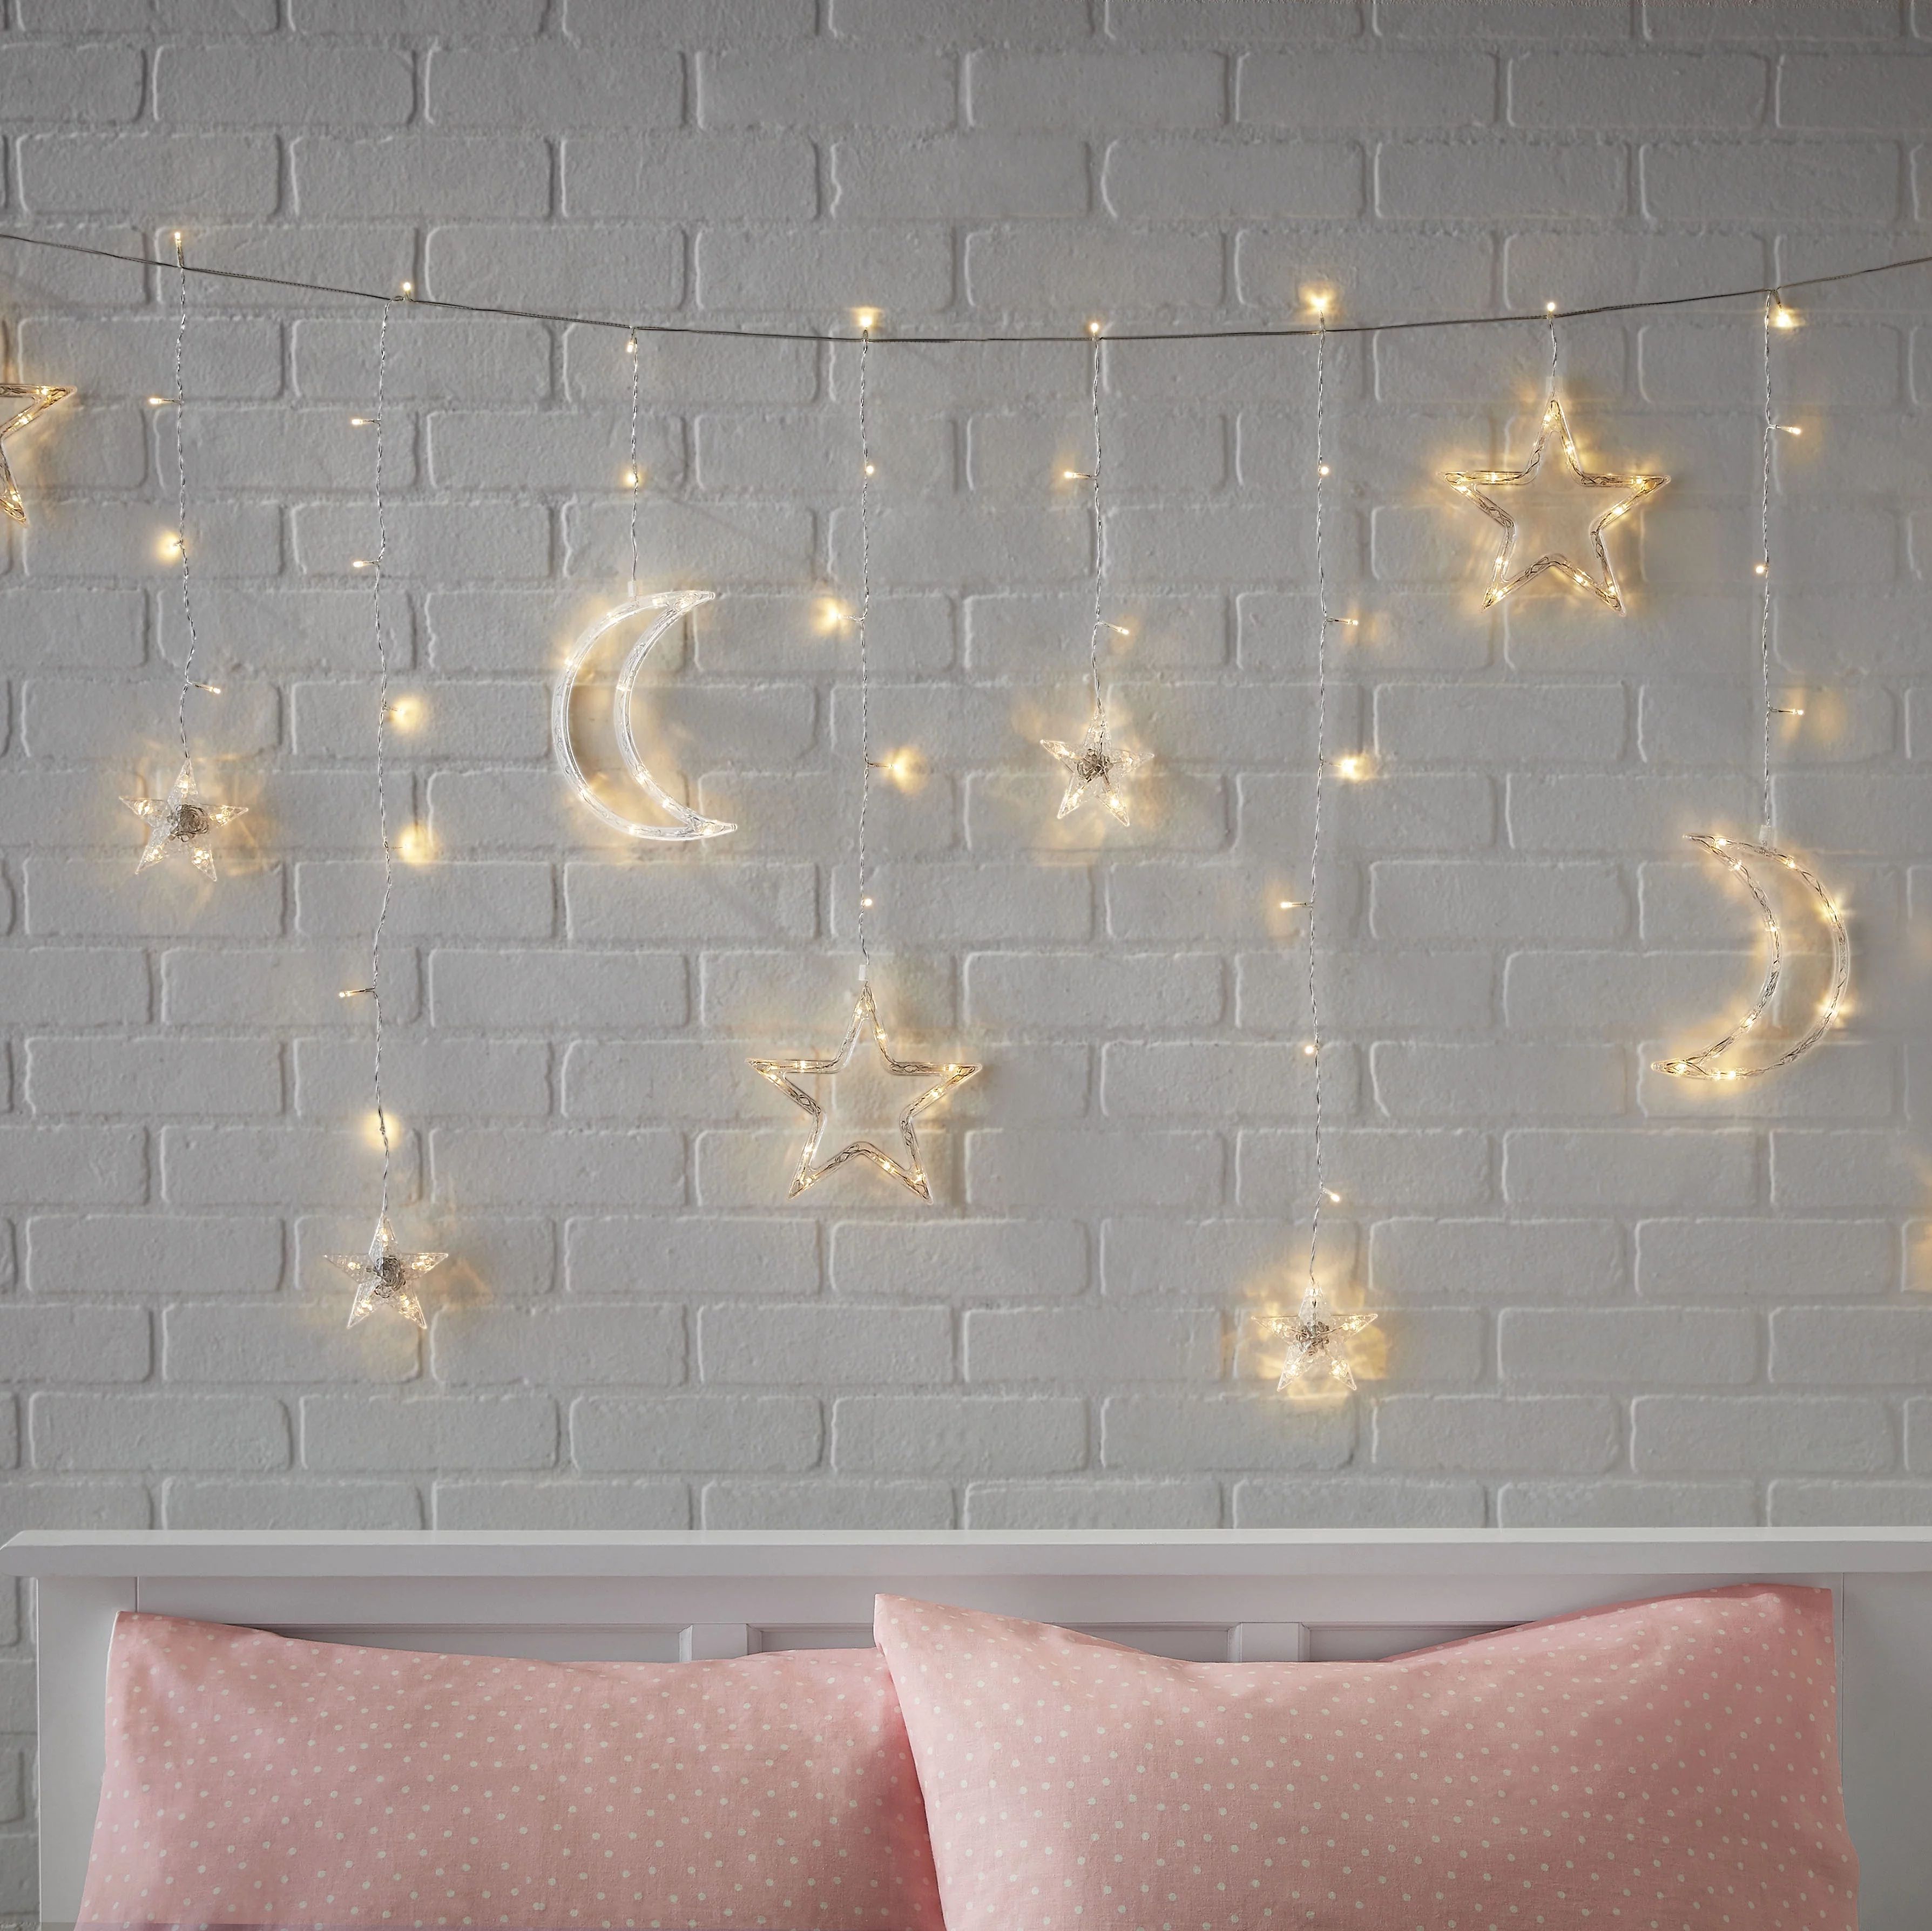 Mainstays 144-Count Indoor Battery Operated Warm White LED Curtain Lights, with Stars and Moons, ... | Walmart (US)